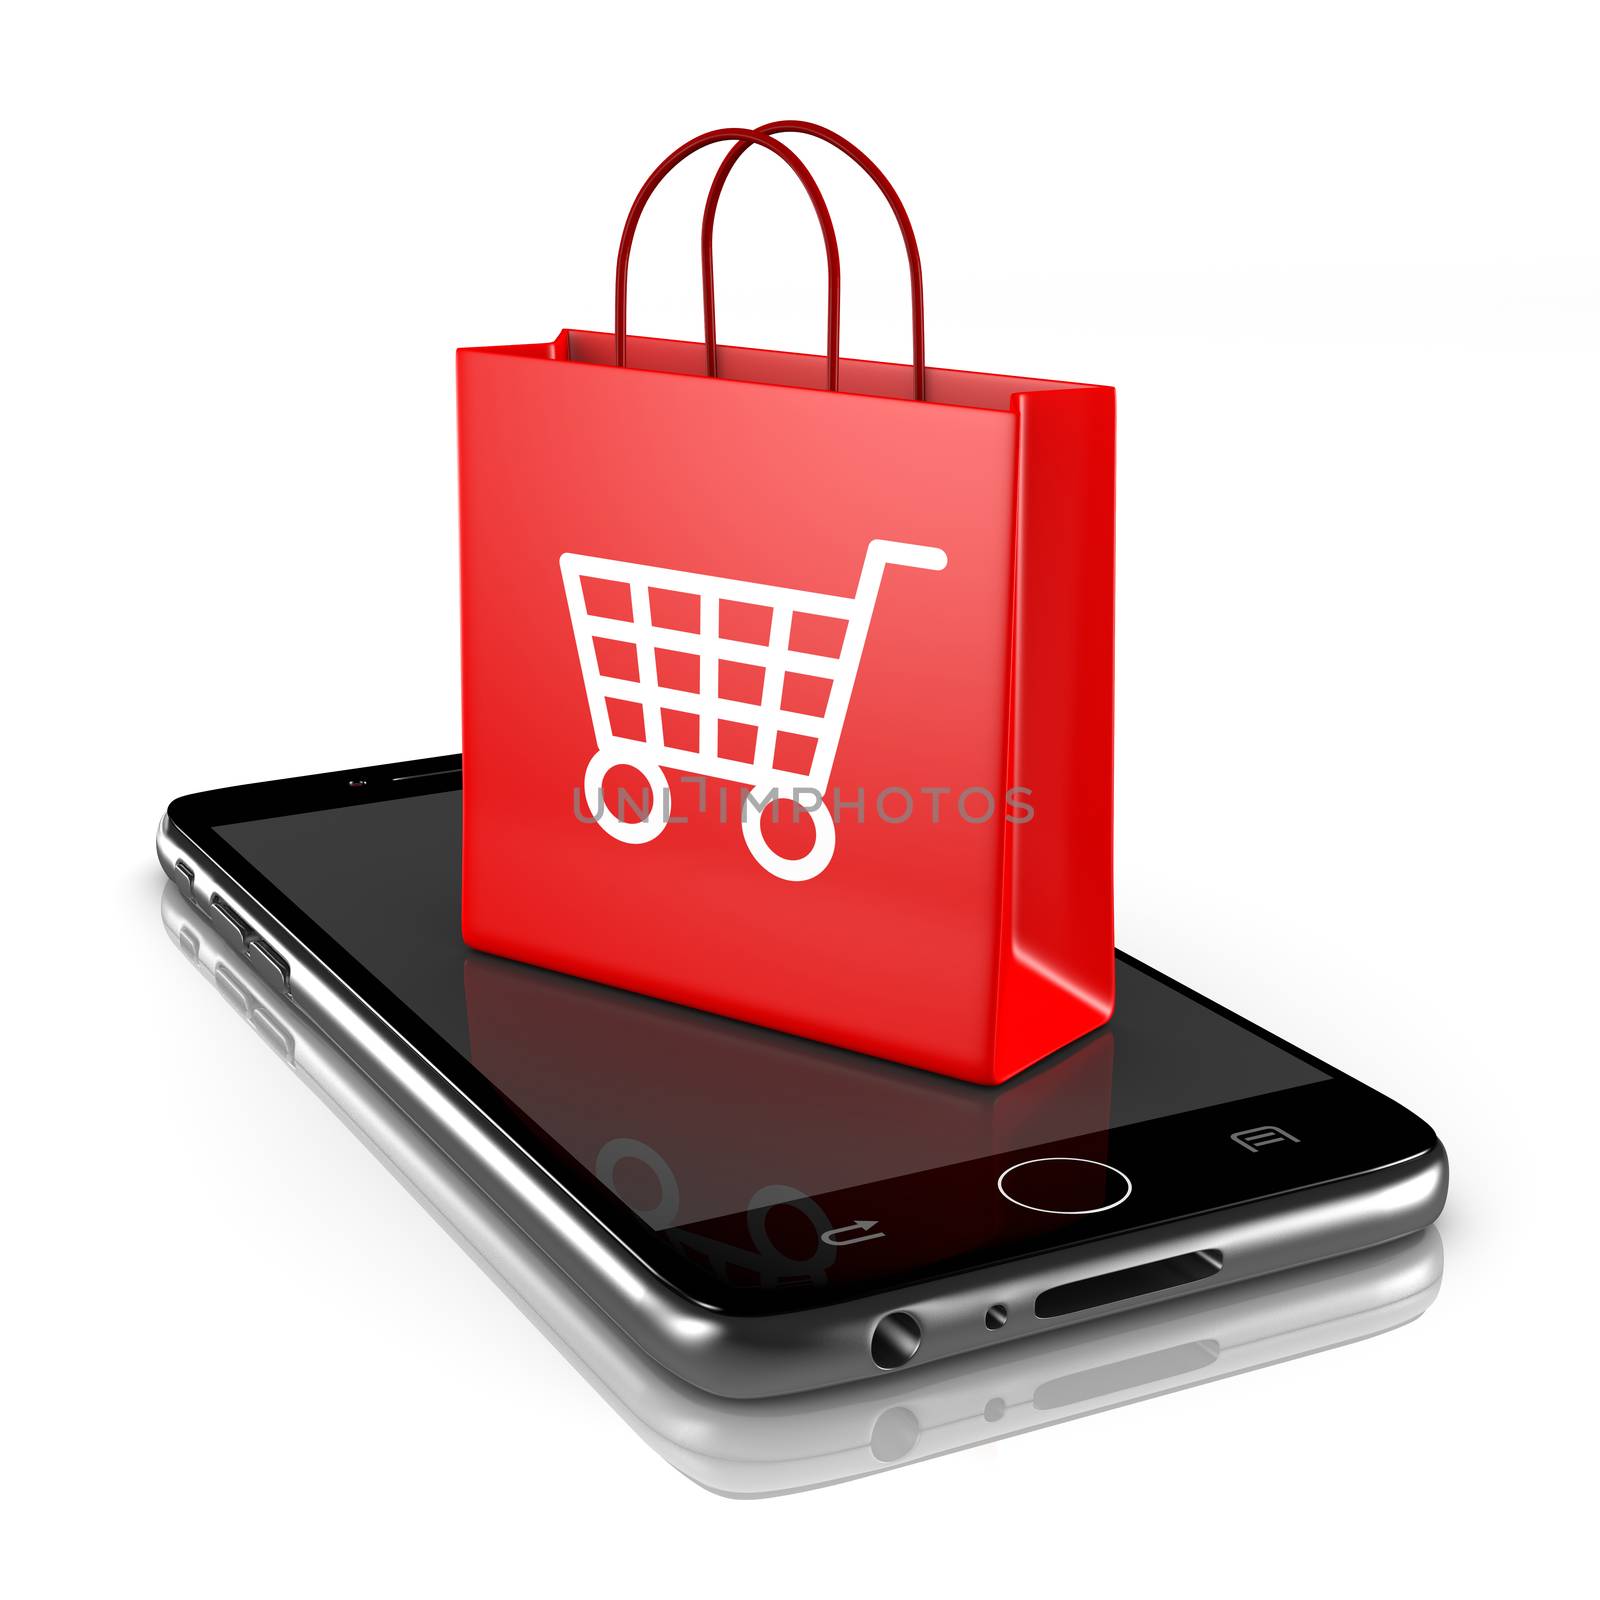 Smartphone with Red Shopping Bag with Shopping Cart Symbol on White Background 3D Illustration, Online Shopping Concept